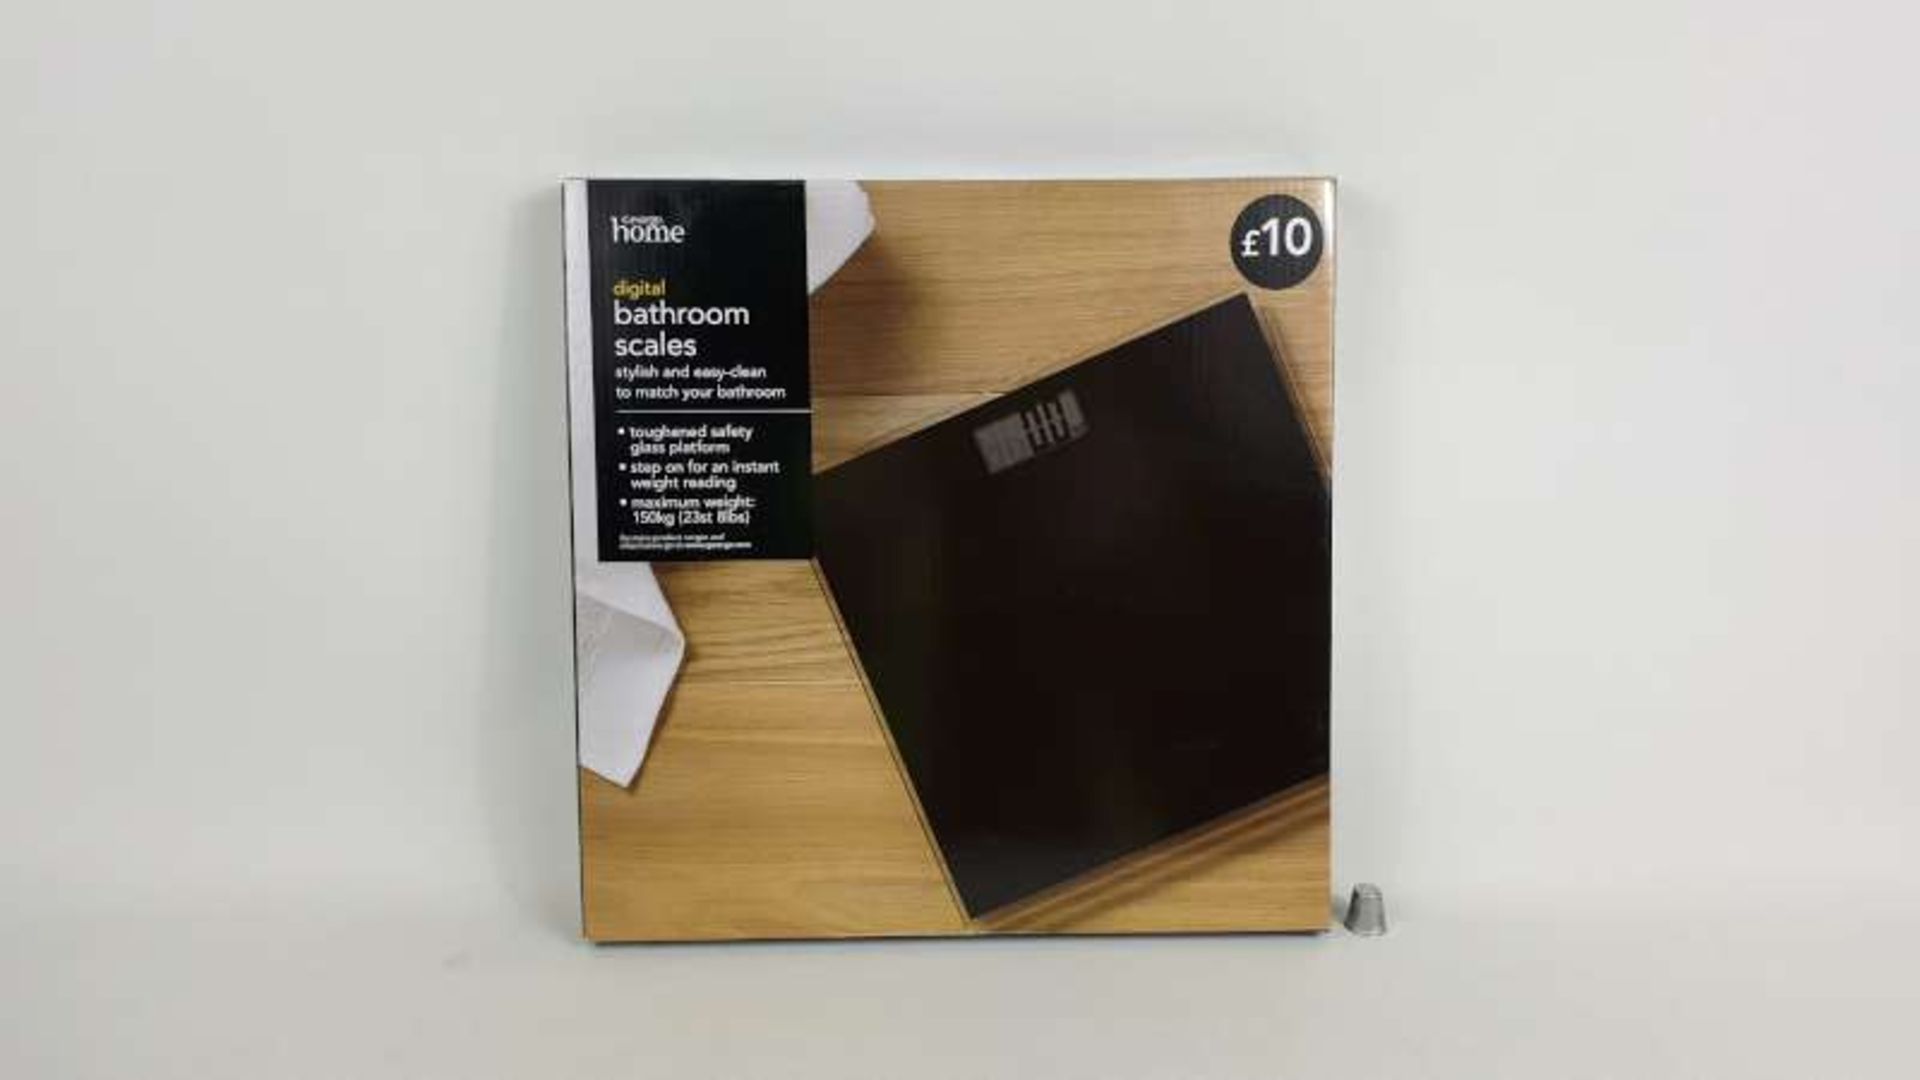 16 X BRAND NEW BOXED DIGITAL BATHROOM SCALES IN 4 BOXES